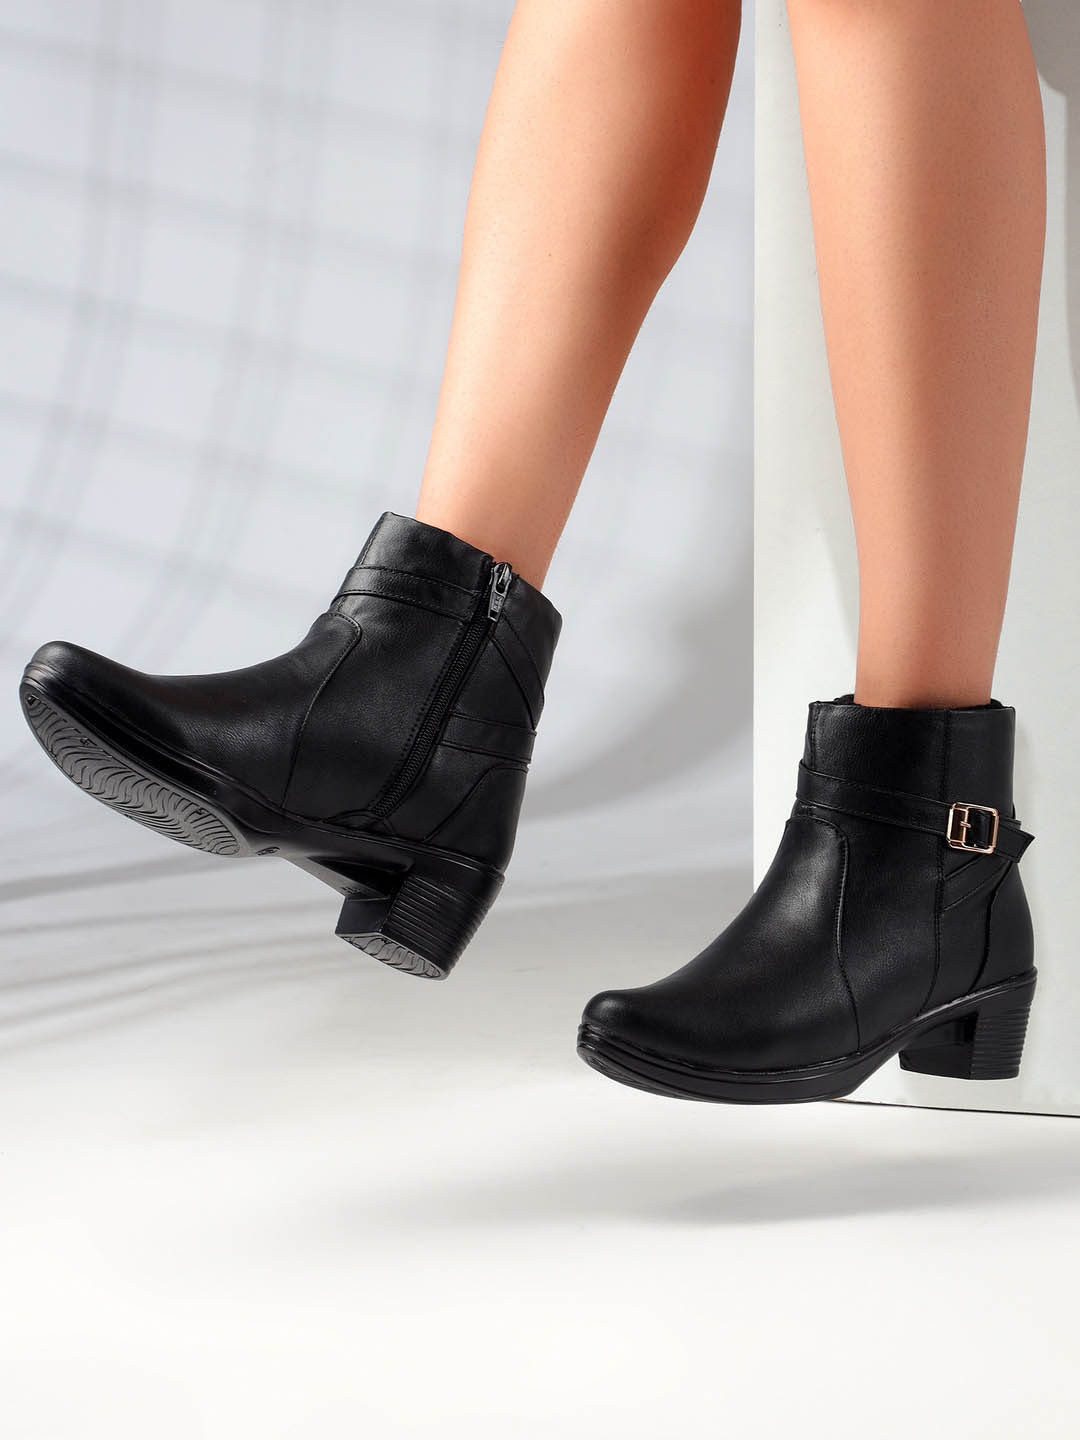 The Roadster Lifestyle Co. Women Black Mid Top Block Heel Chunky Boots With Buckle Detail